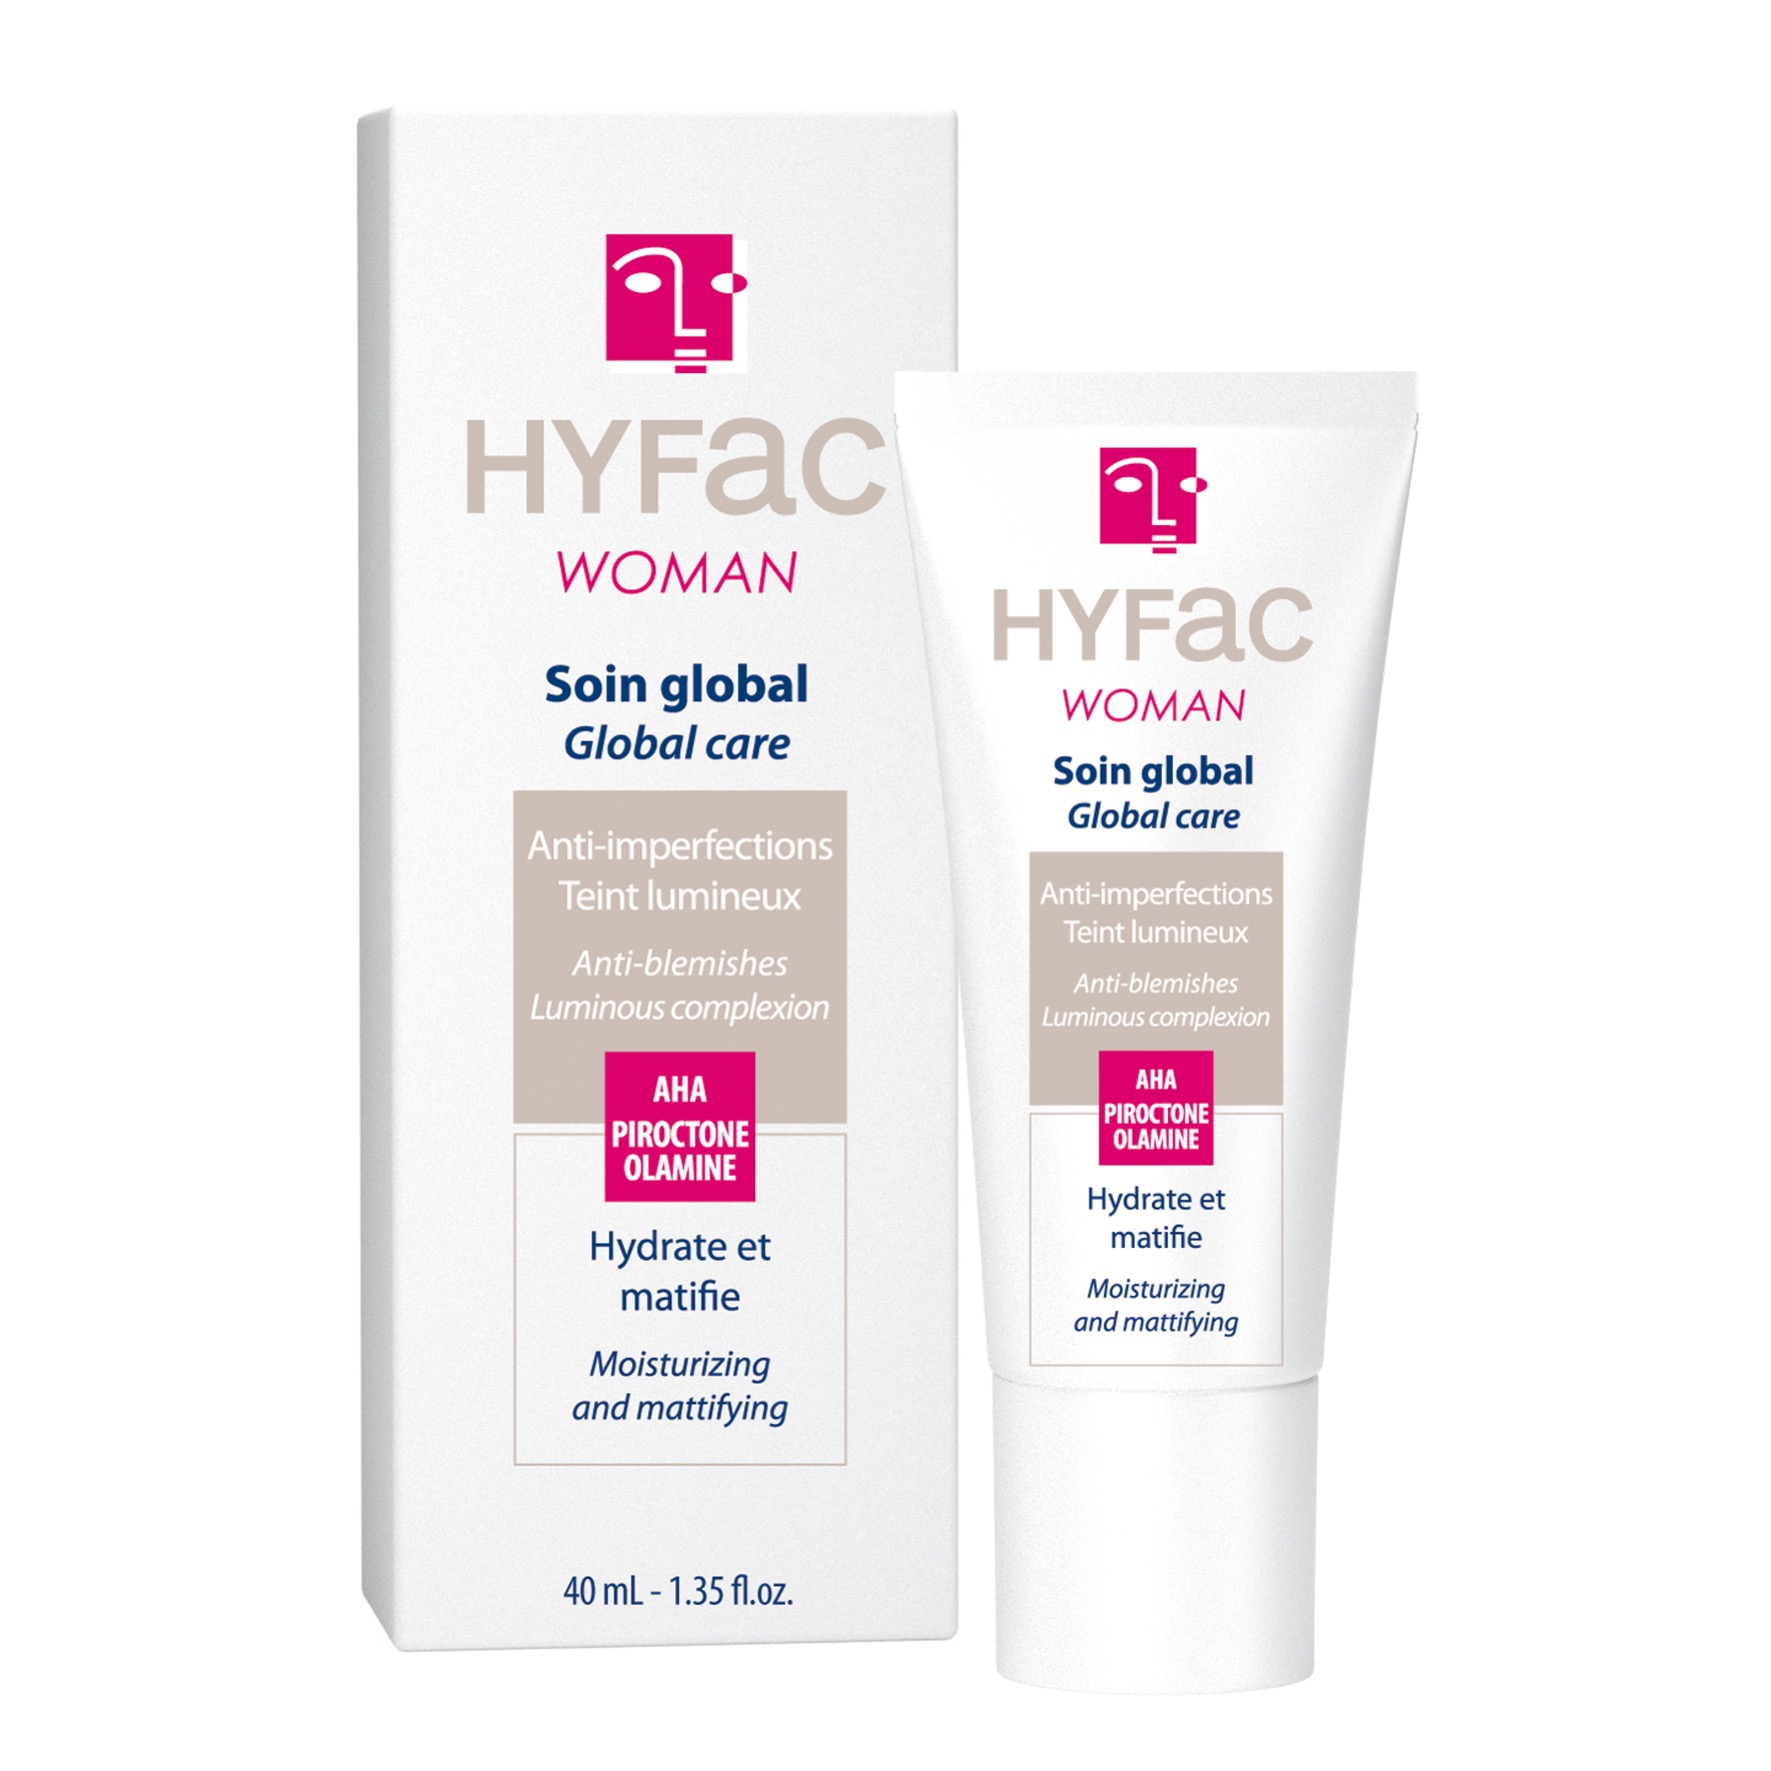 HYFAC WOMAN global anti imperfection care for women with acne